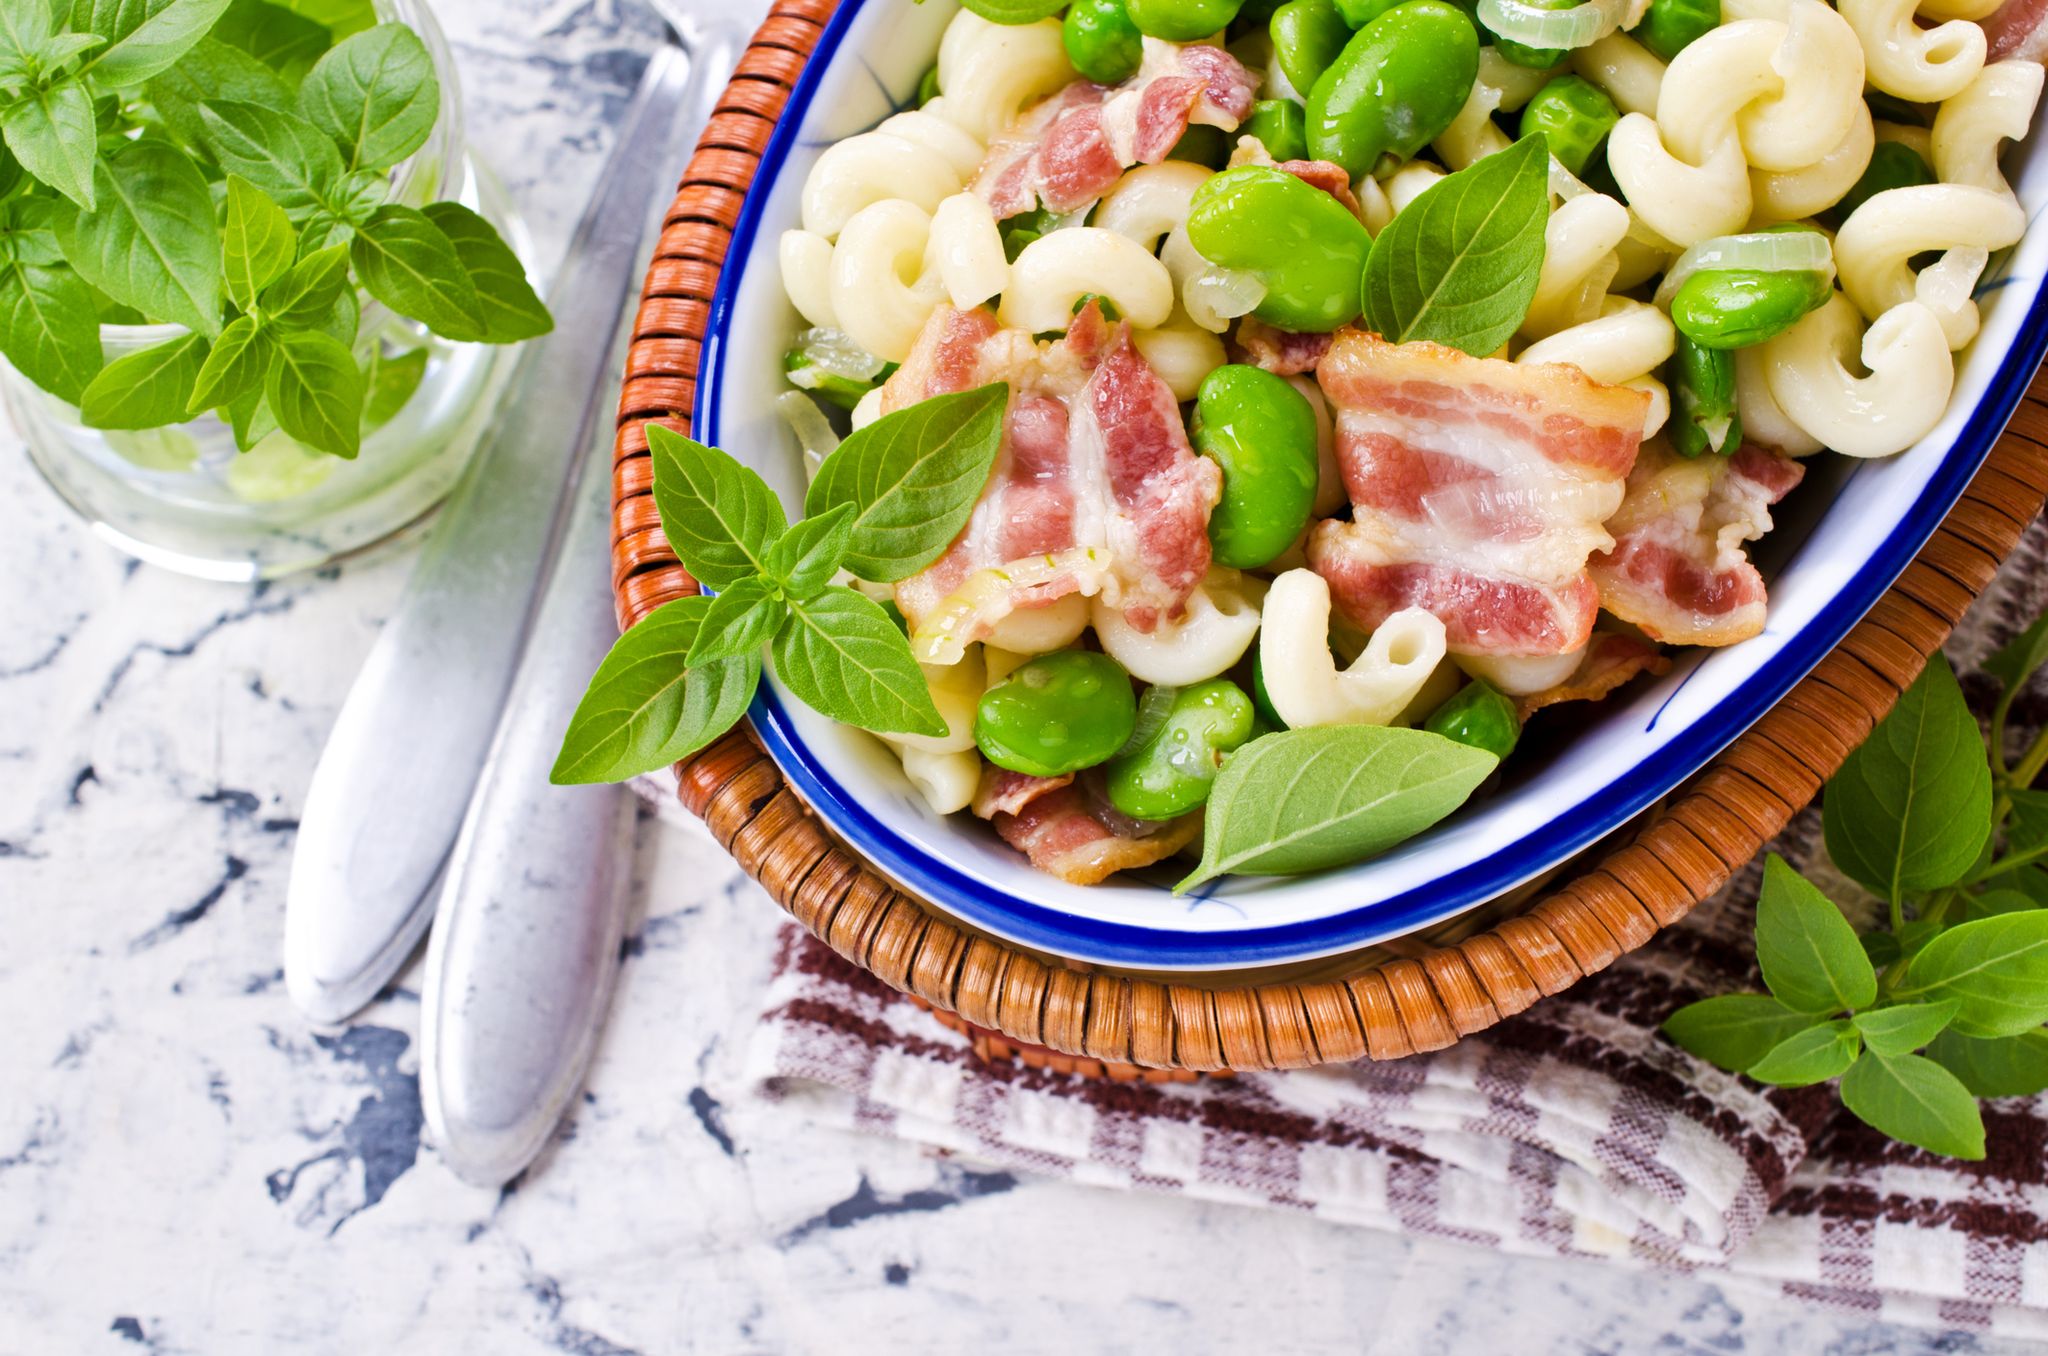 Pasta with bacon and vegetables